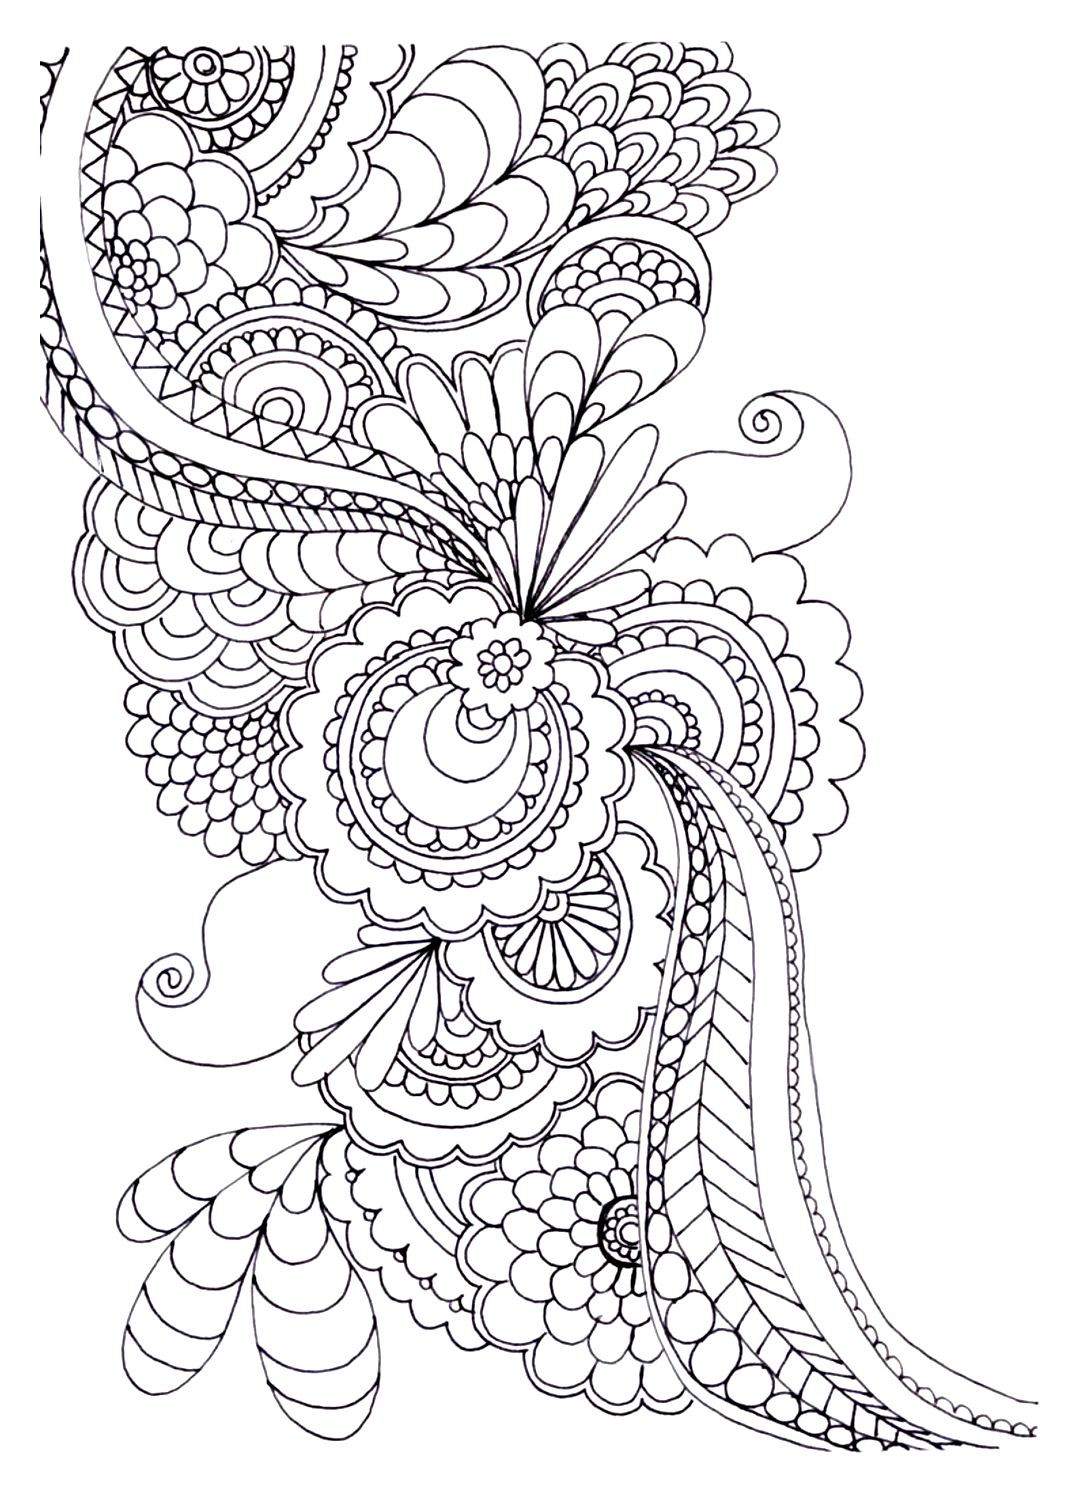 Adult Coloring Book Images
 20 Free Adult Colouring Pages The Organised Housewife